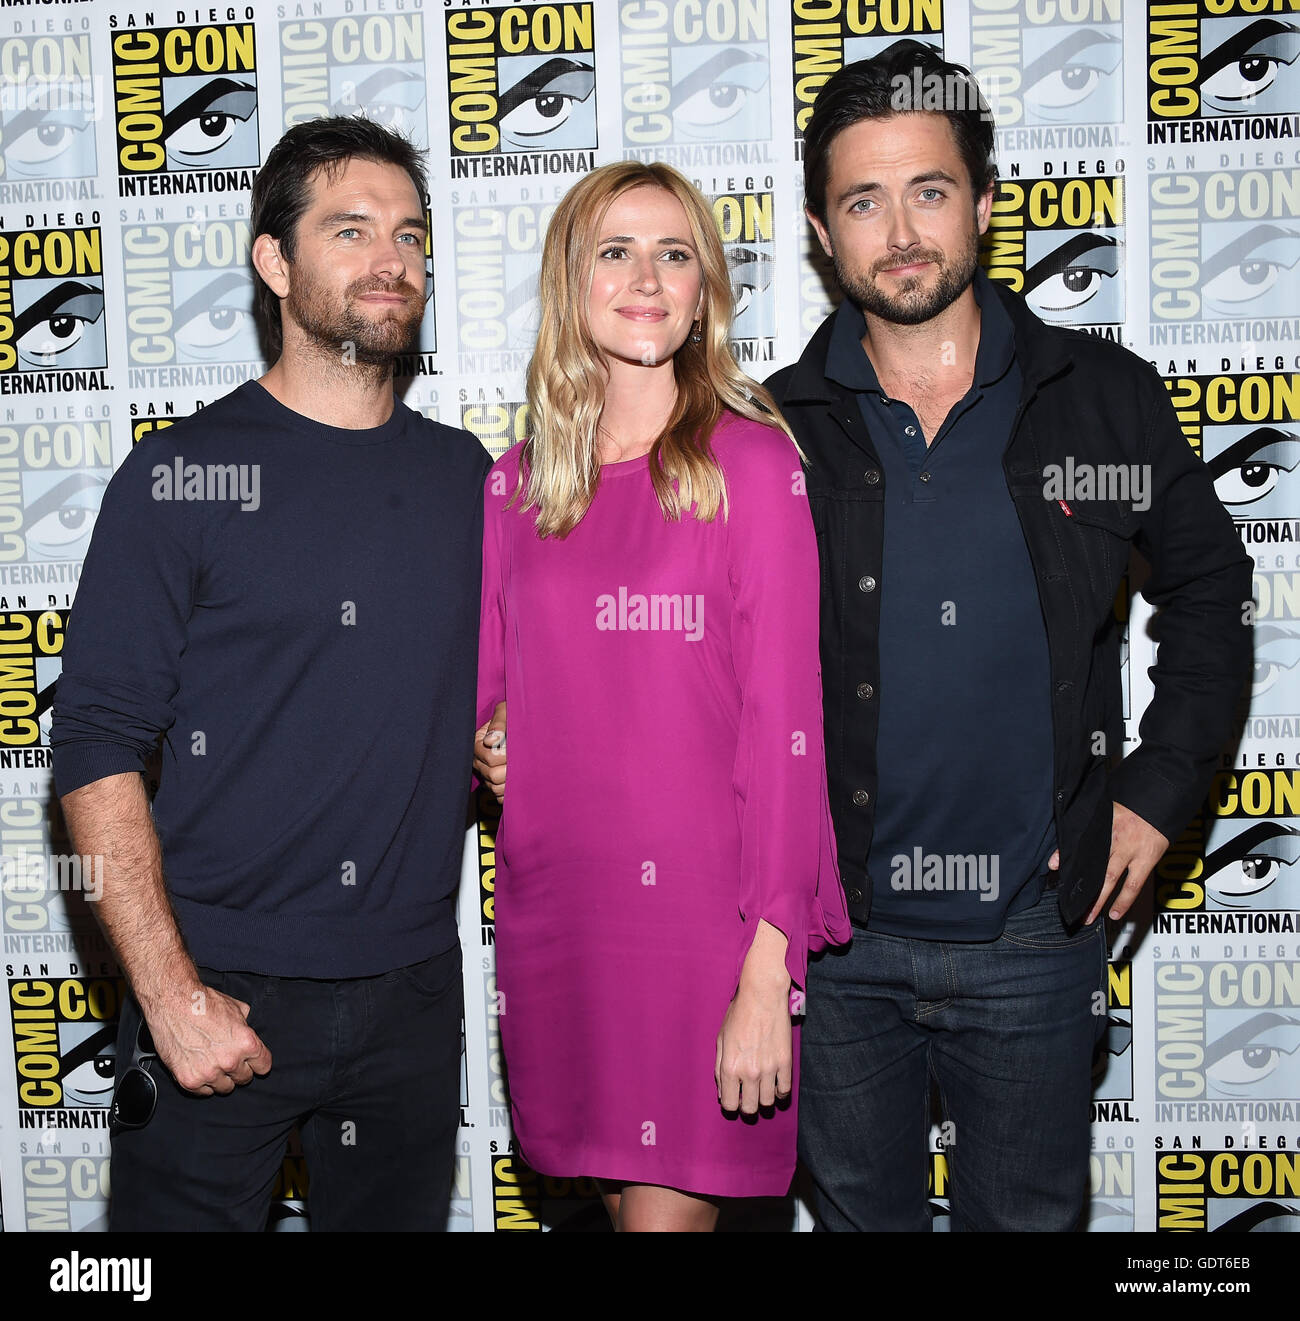 Justin Chatwin editorial image. Image of premiere, chatwin - 32585690